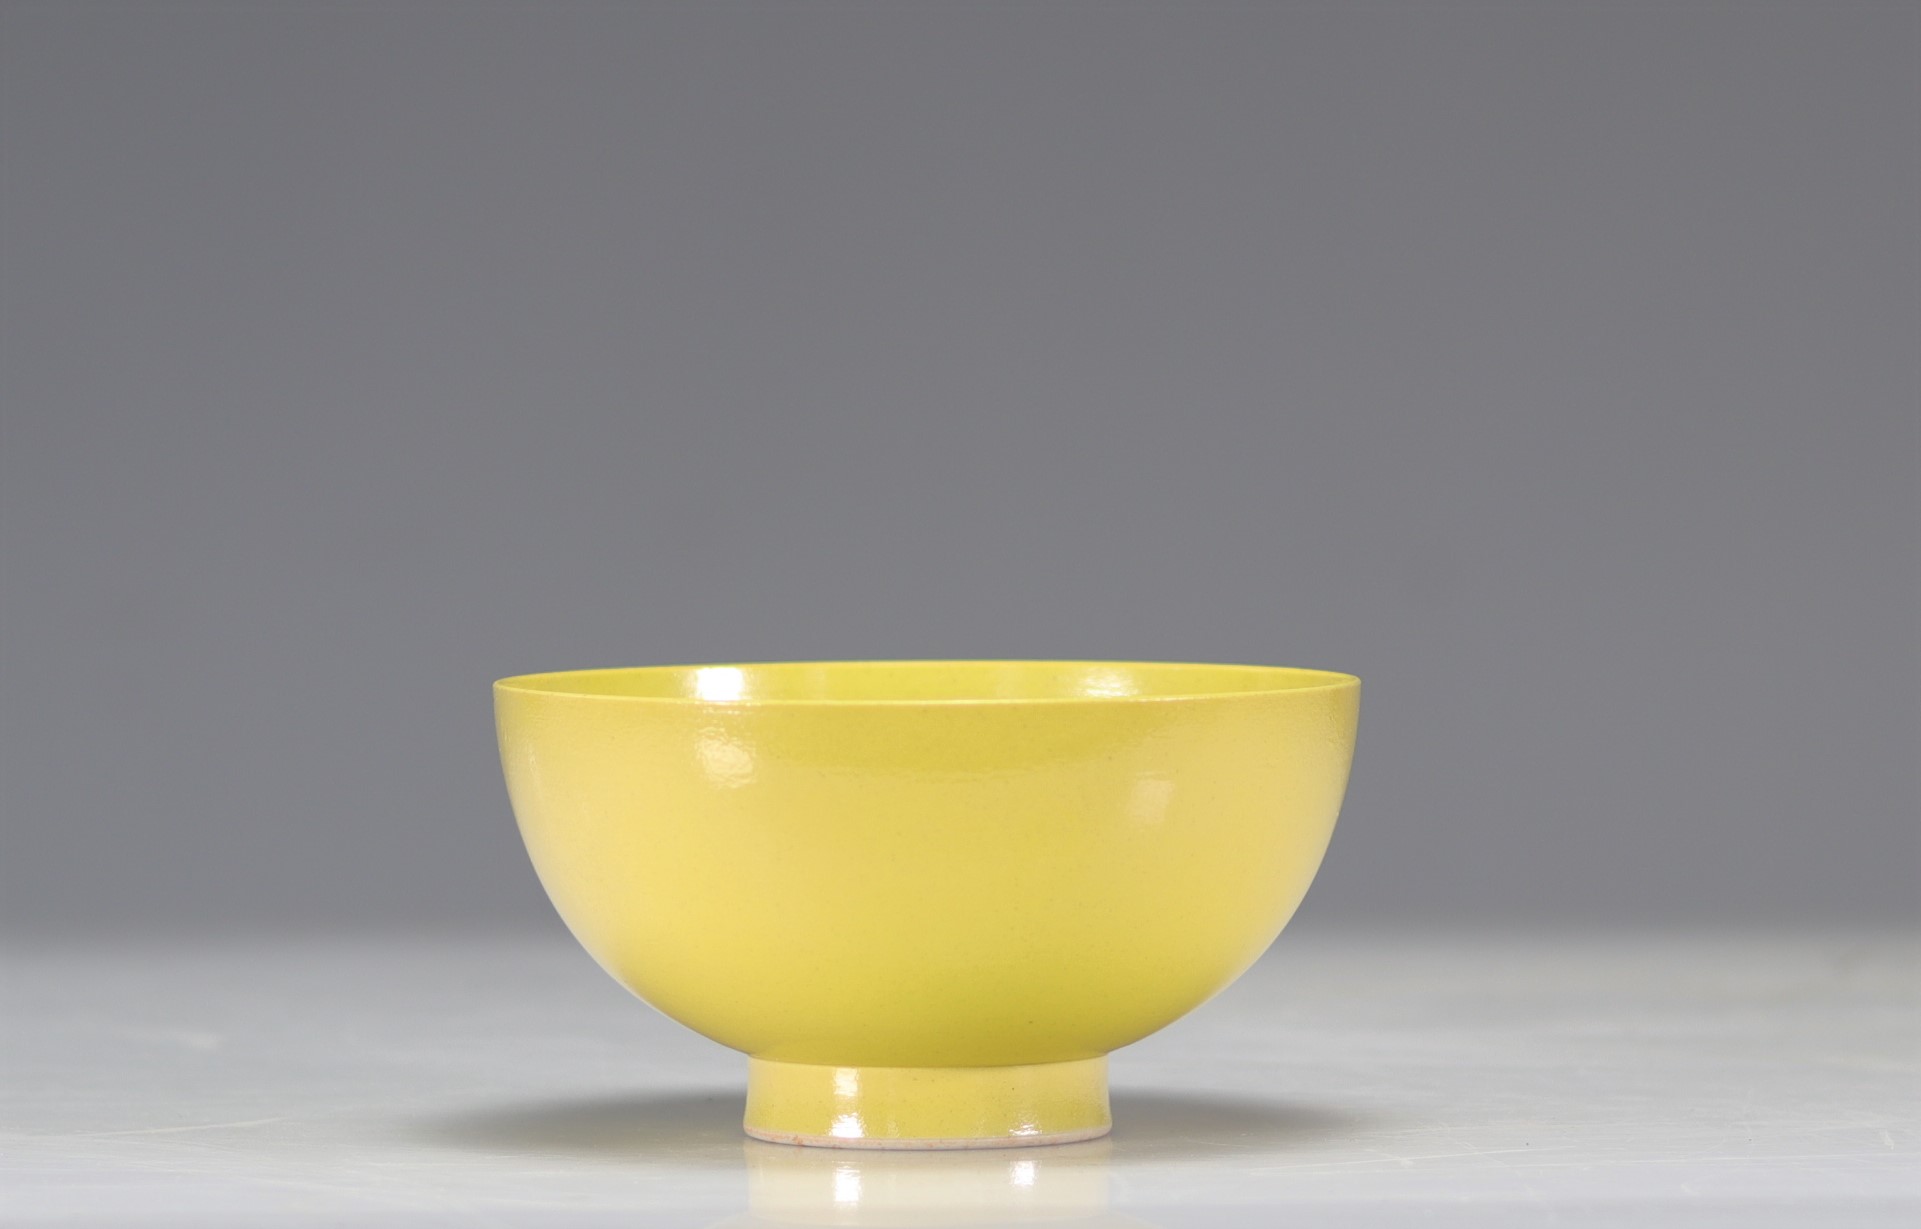 19th century yellow monochrome porcelain bowl Daoguang brand and period - Image 4 of 4